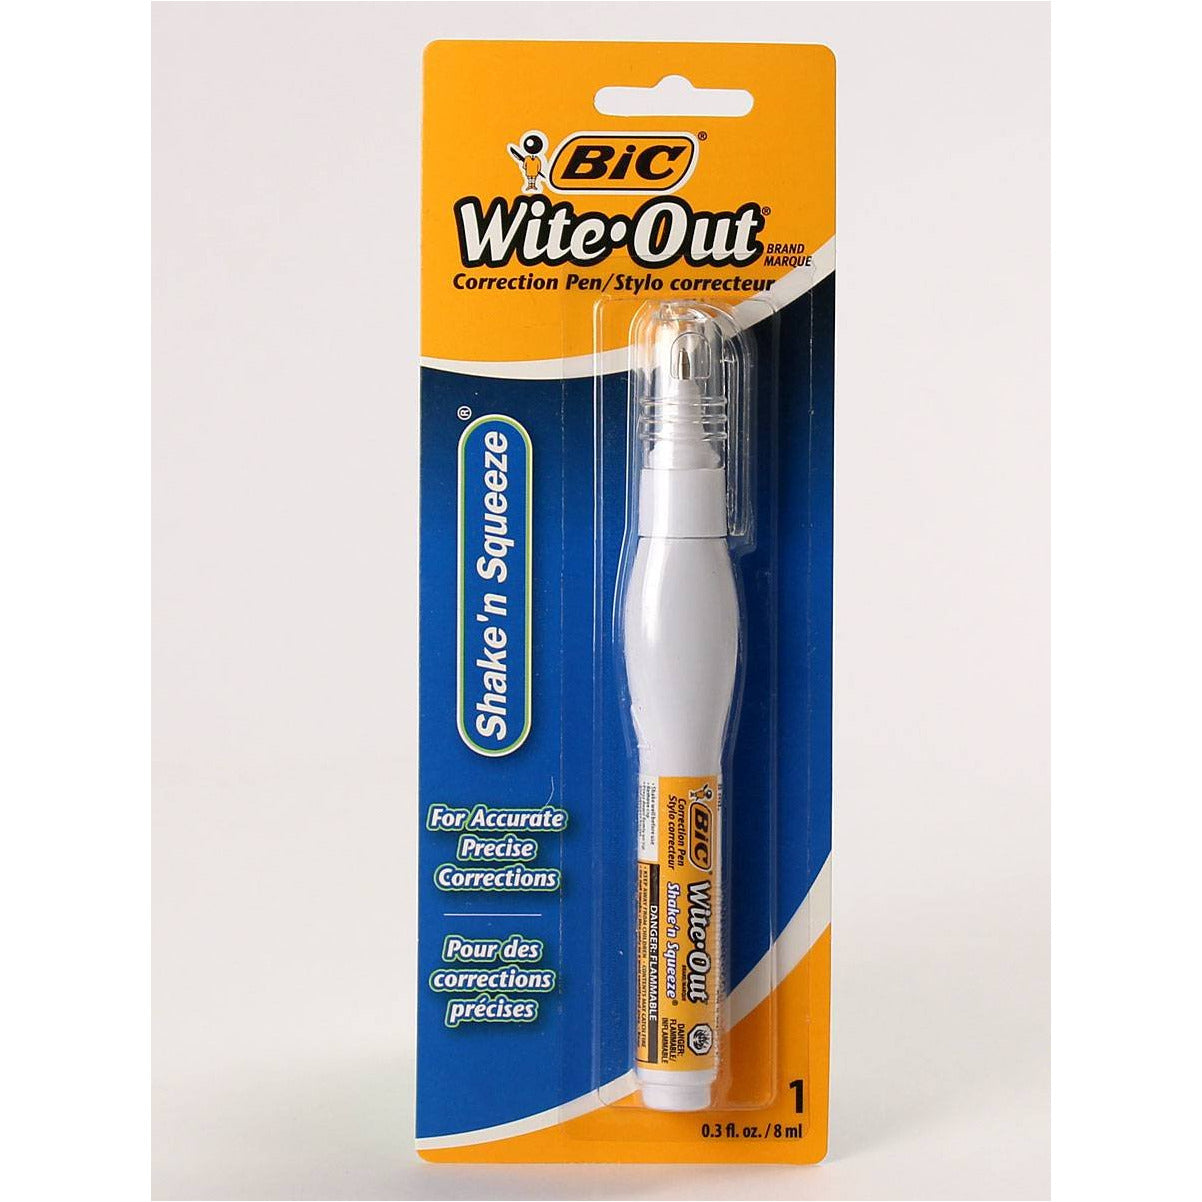 Bic Wite Out Correction Pen 1pk